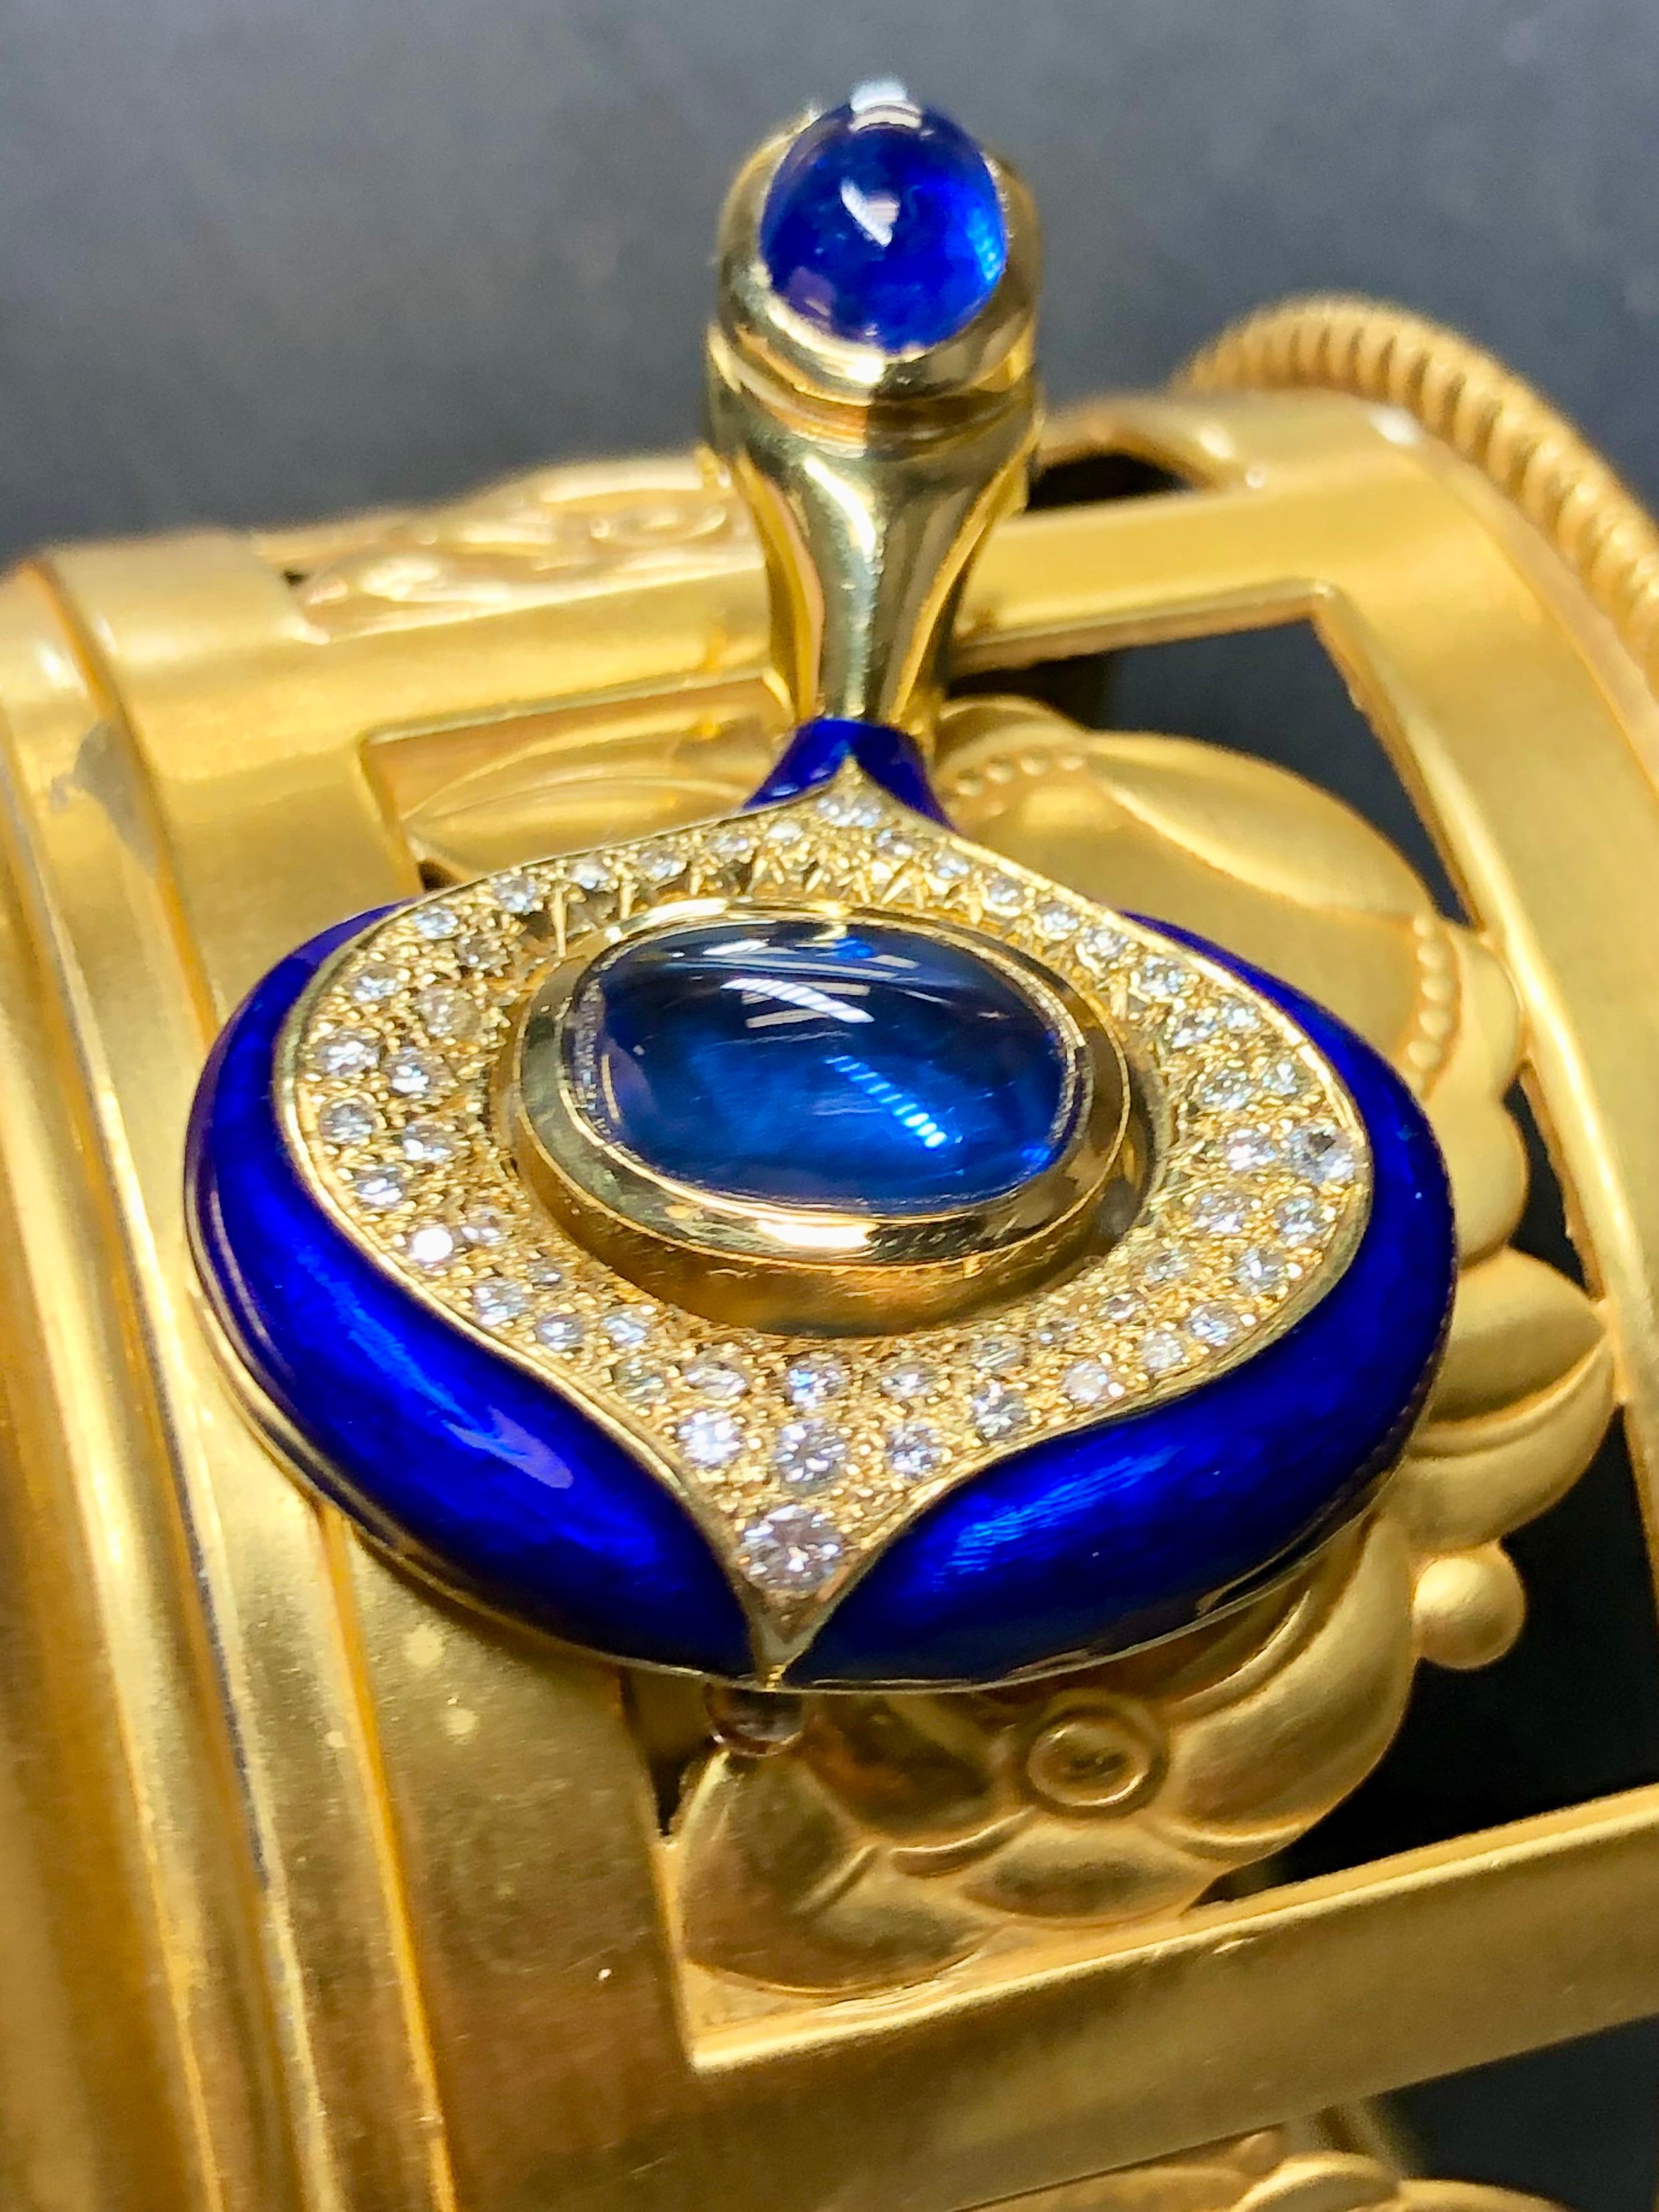 Vintage 18K Cabochon Ceylon Sapphire Diamond Enamel Brooch Pendant 11.85cttw GIA In Good Condition For Sale In Winter Springs, FL